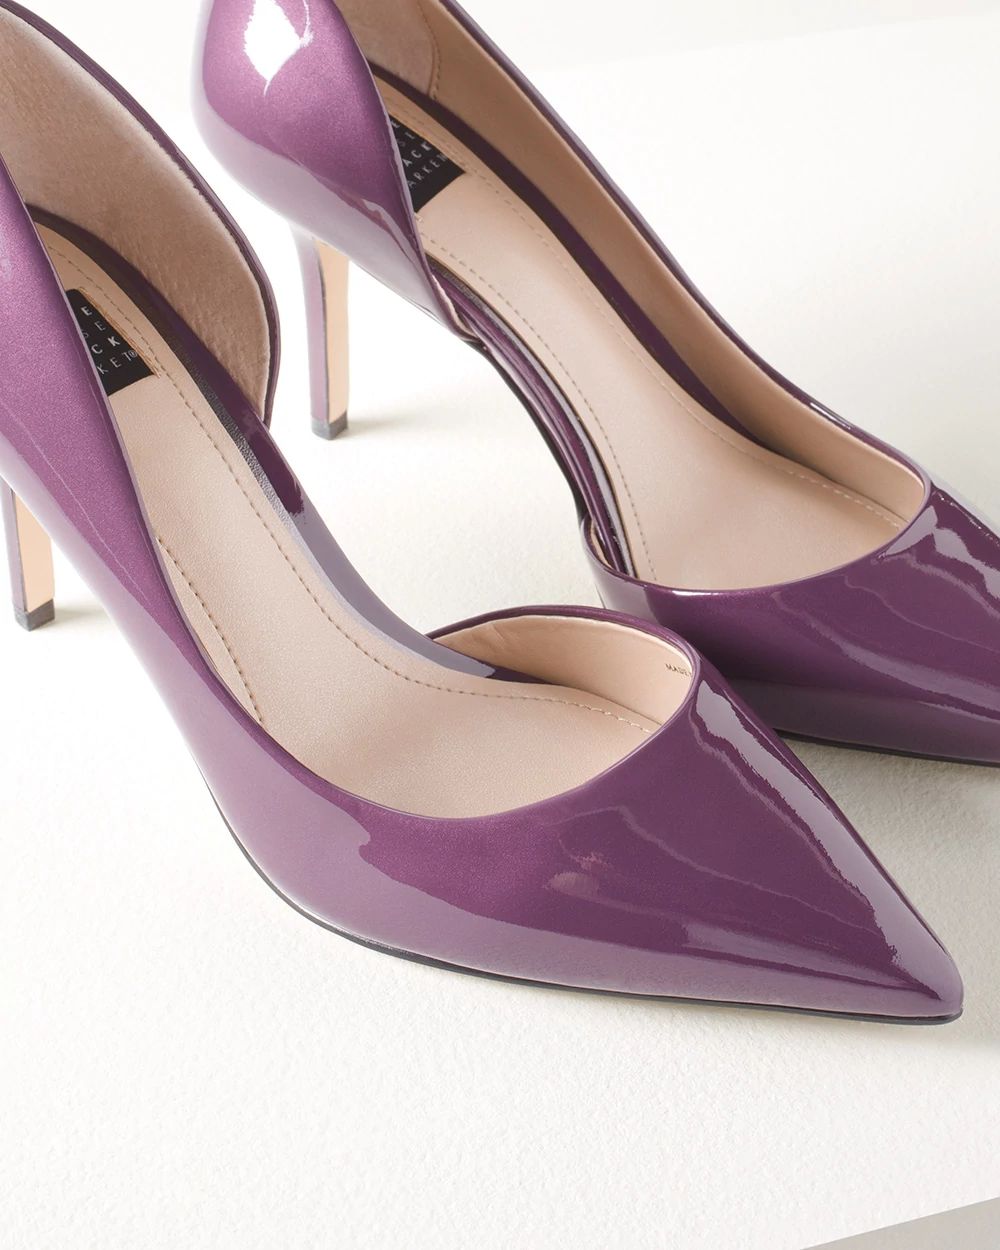 Patent Leather Mid-Heeled Pumps click to view larger image.